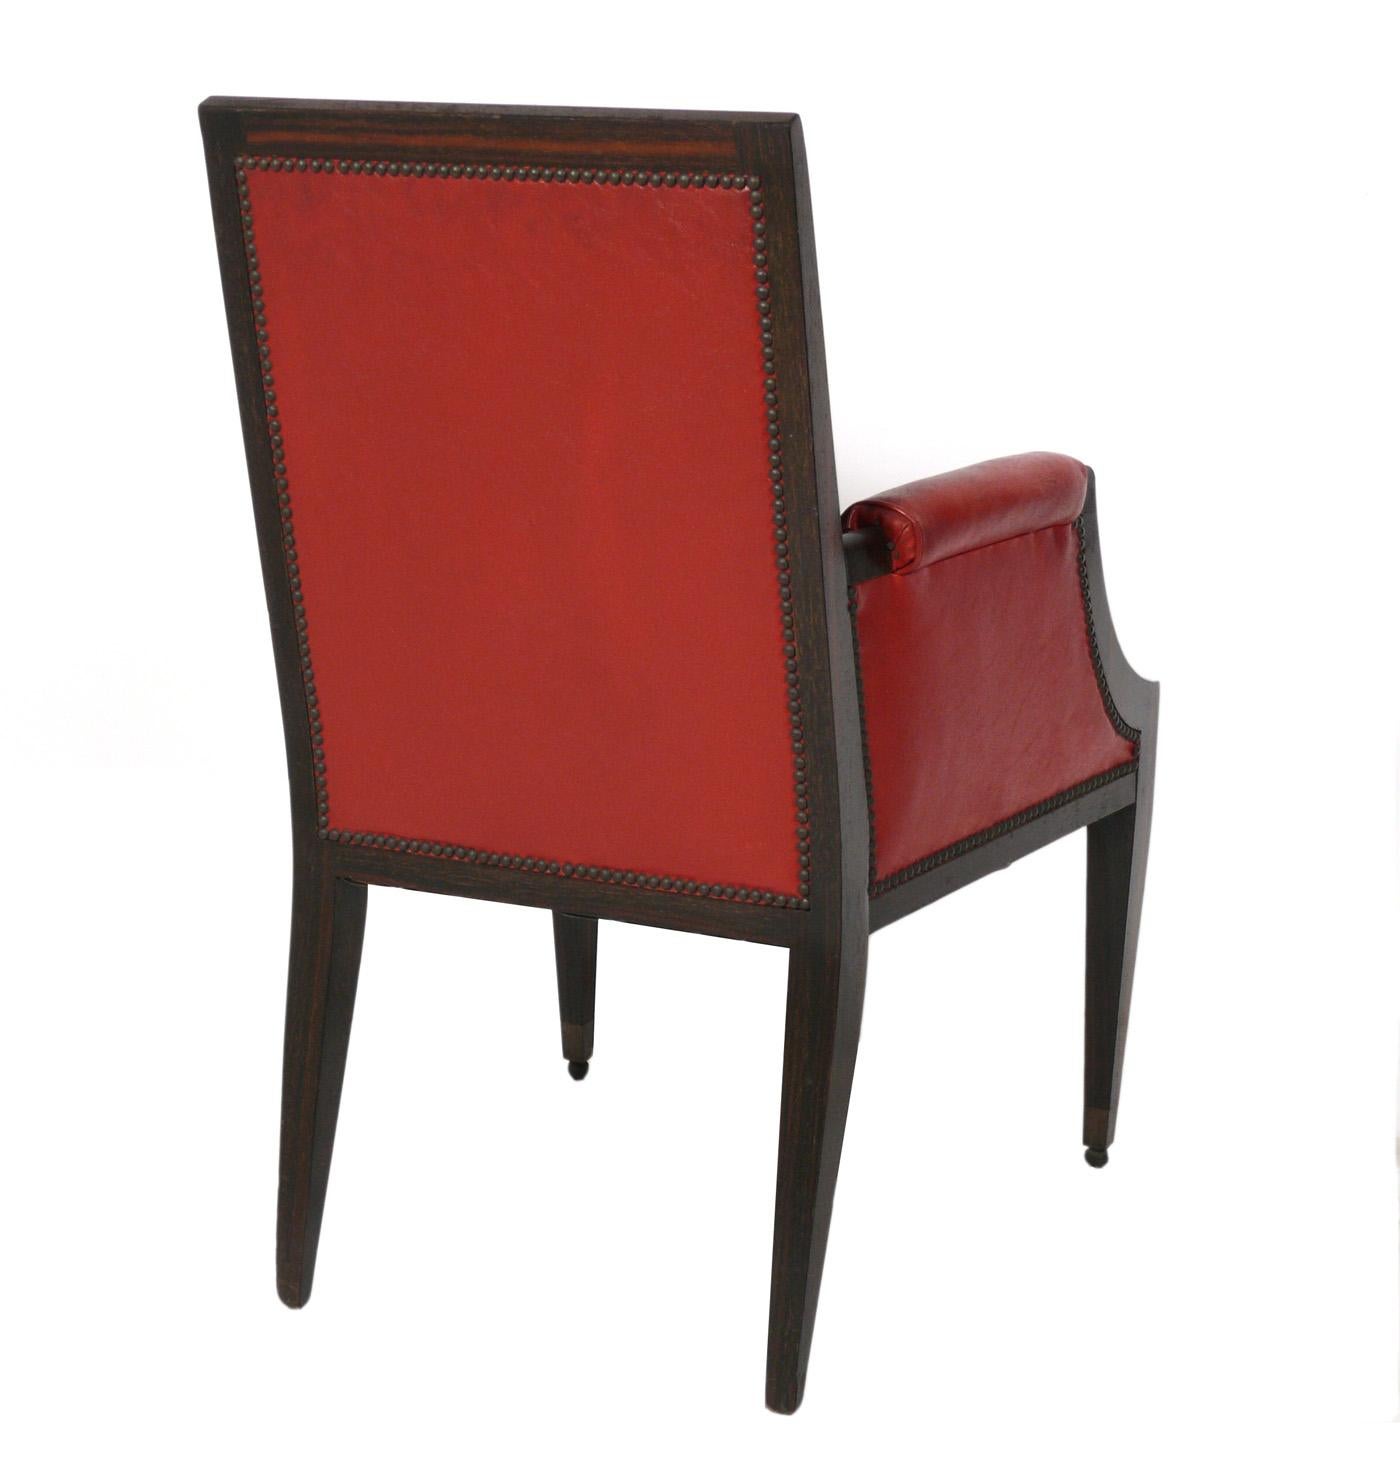 Mid-20th Century French Art Deco Rosewood Chair, circa 1930s